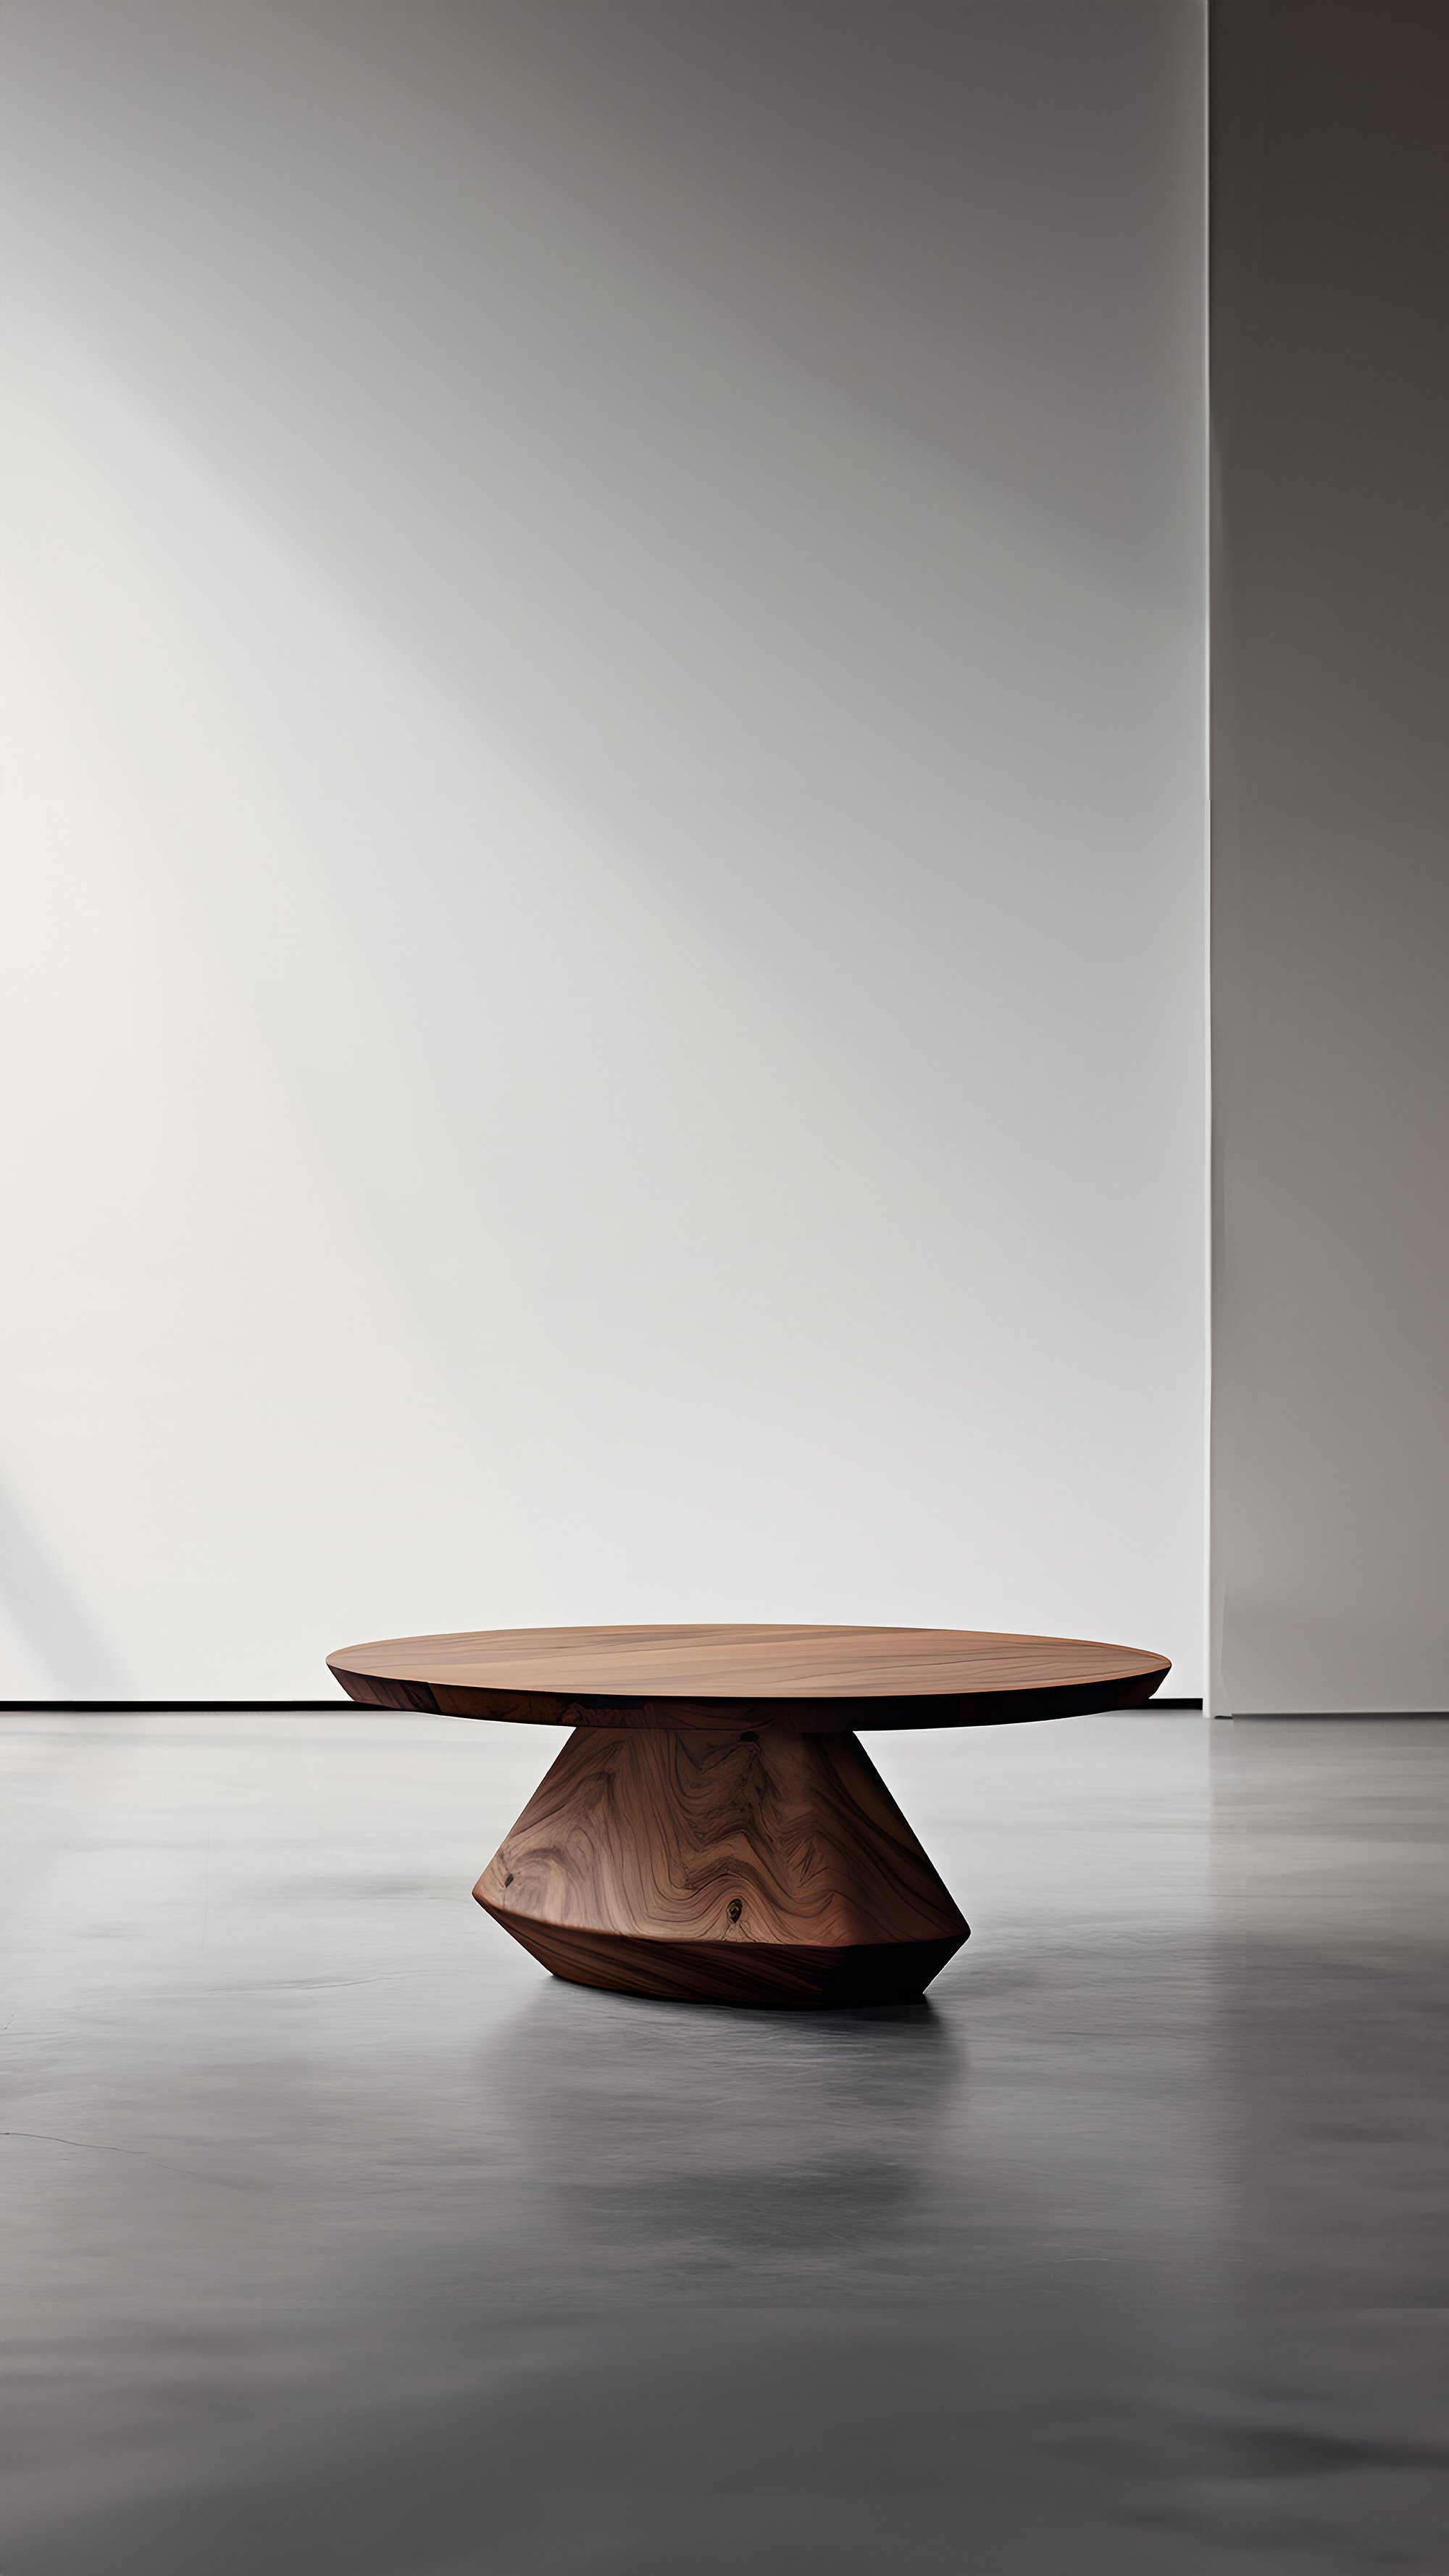 Sculptural Coffee Table Made of Solid Wood, Center Table Solace S34 by Joel Escalona — 6.jpg